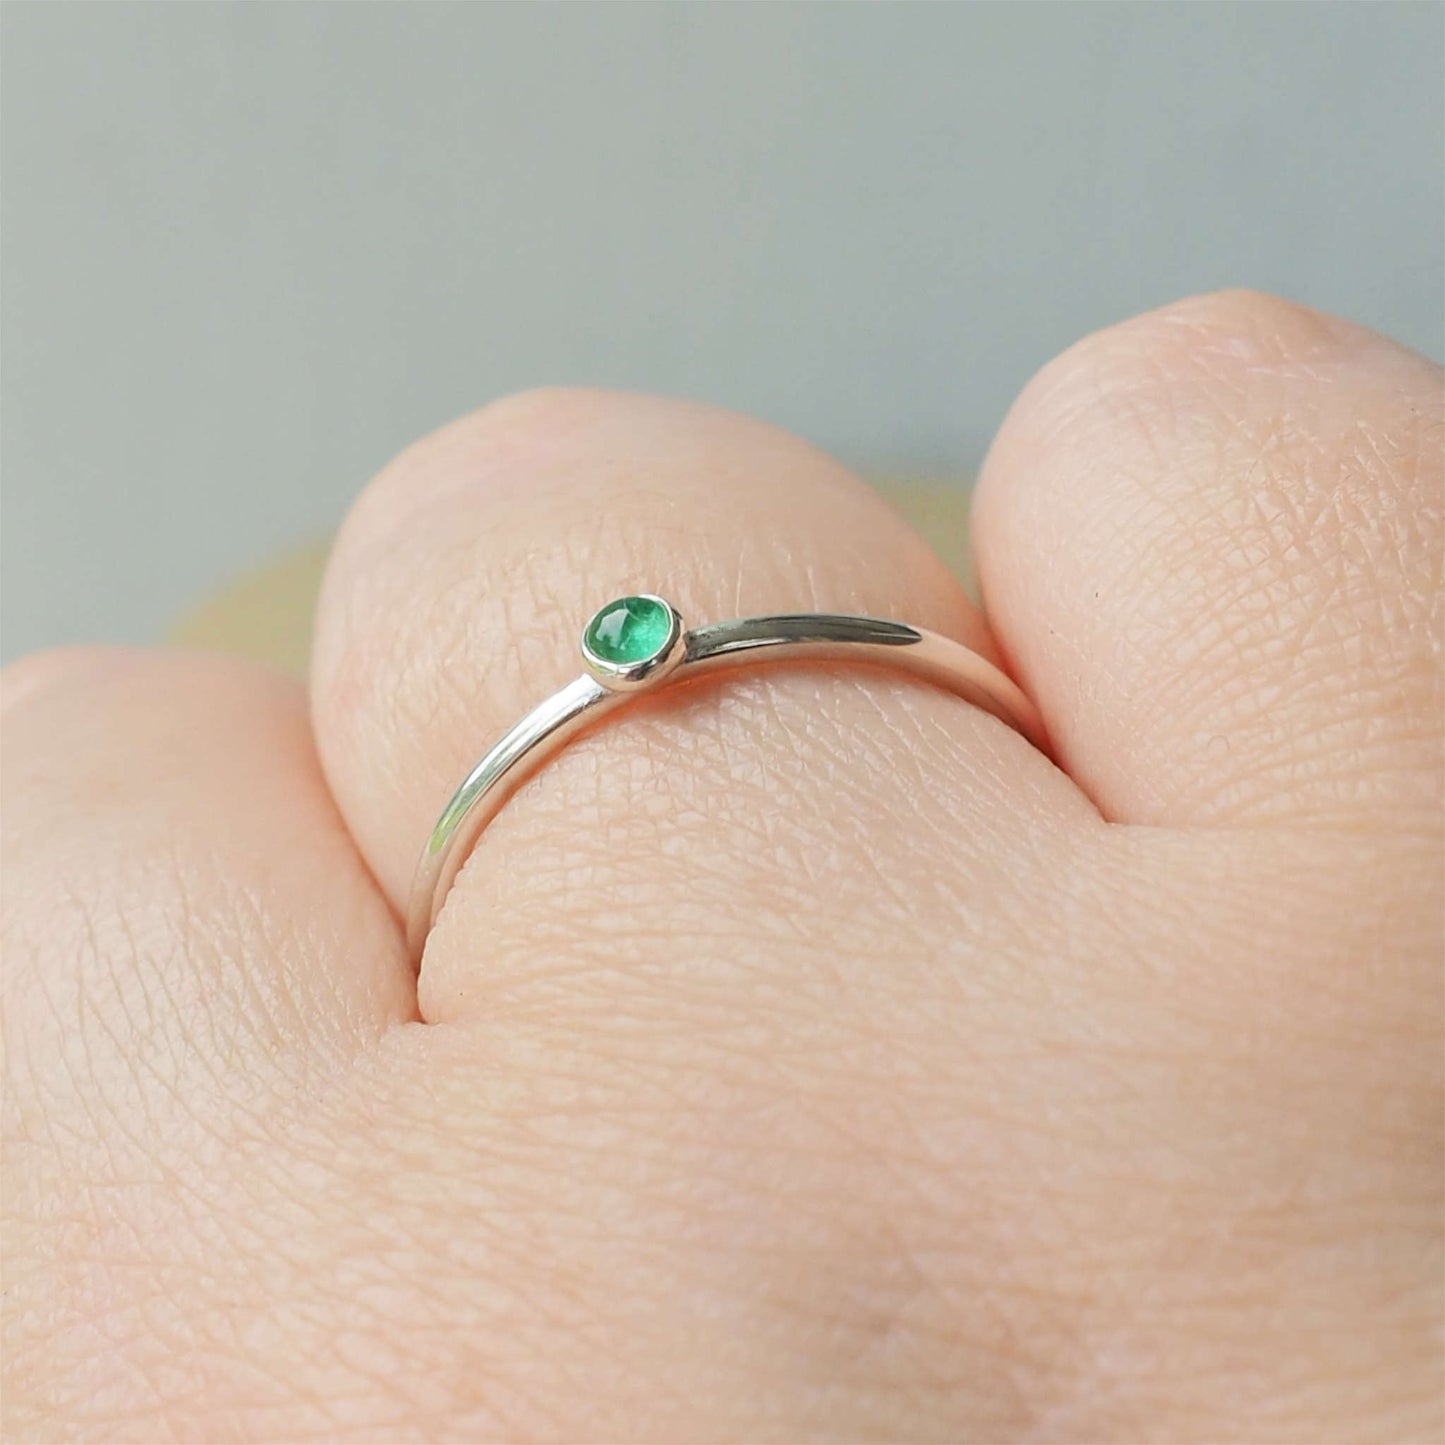 Emerald and Sterling Silver Gemstone ring with a round 3mm cabochon in Emerald, Birthstone for May. Handmade in Scotland by maram jewellery